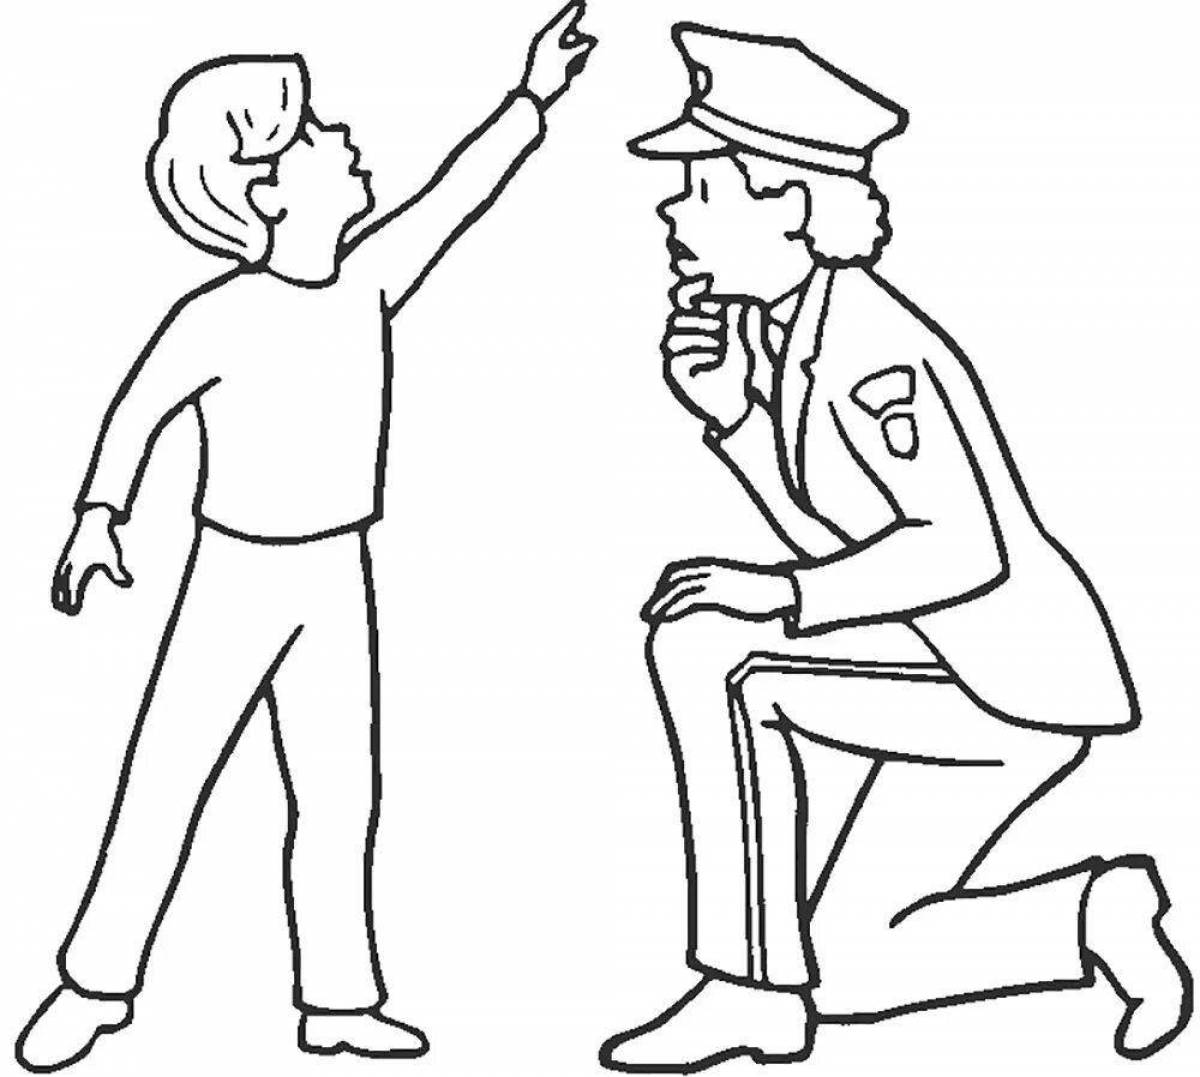 Playful cop coloring page for kids